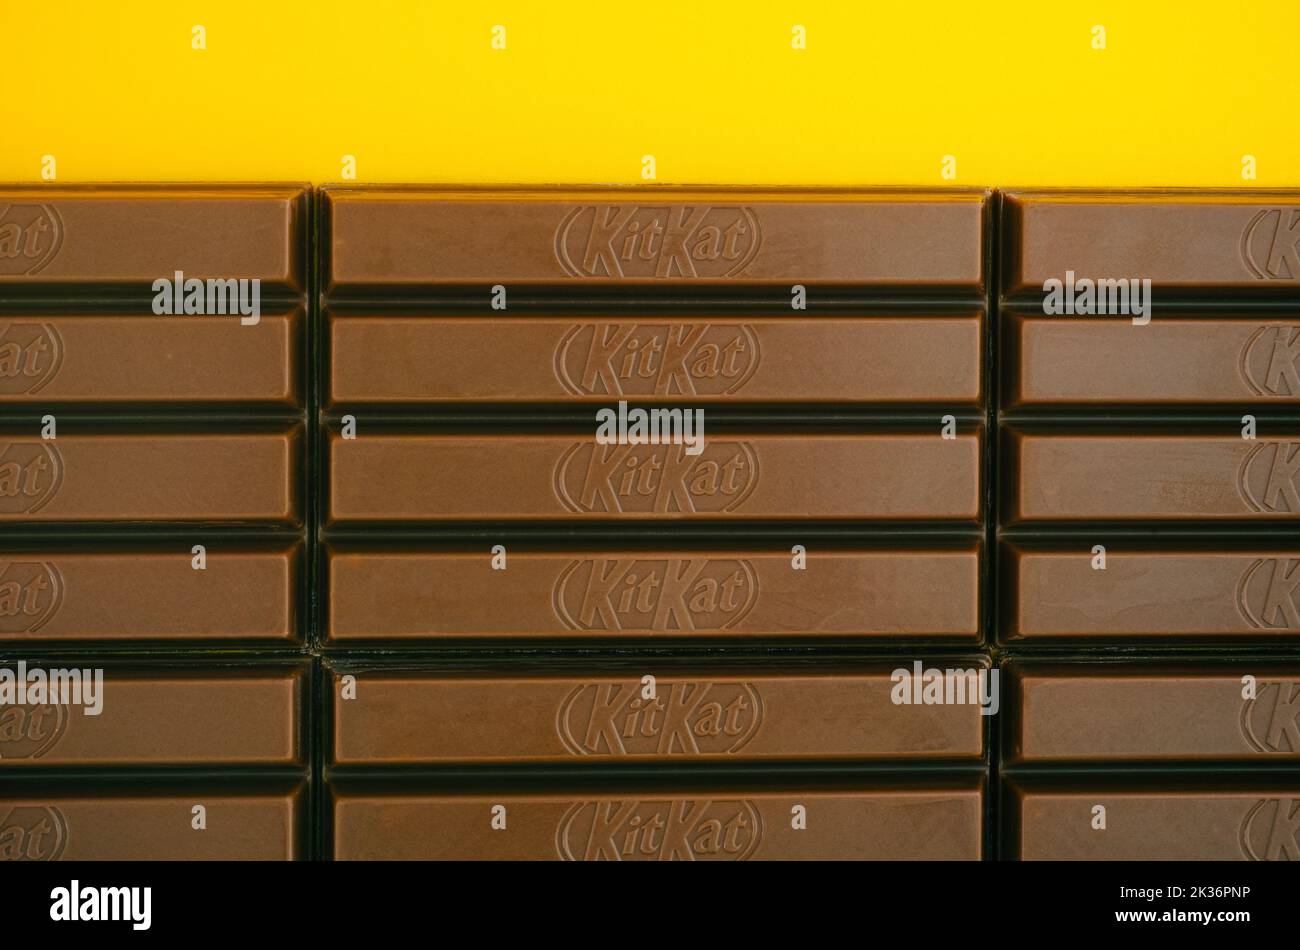 Tambov, Russian Federation - March 19, 2021 A KitKat chocolate bars on a yellow background. Stock Photo